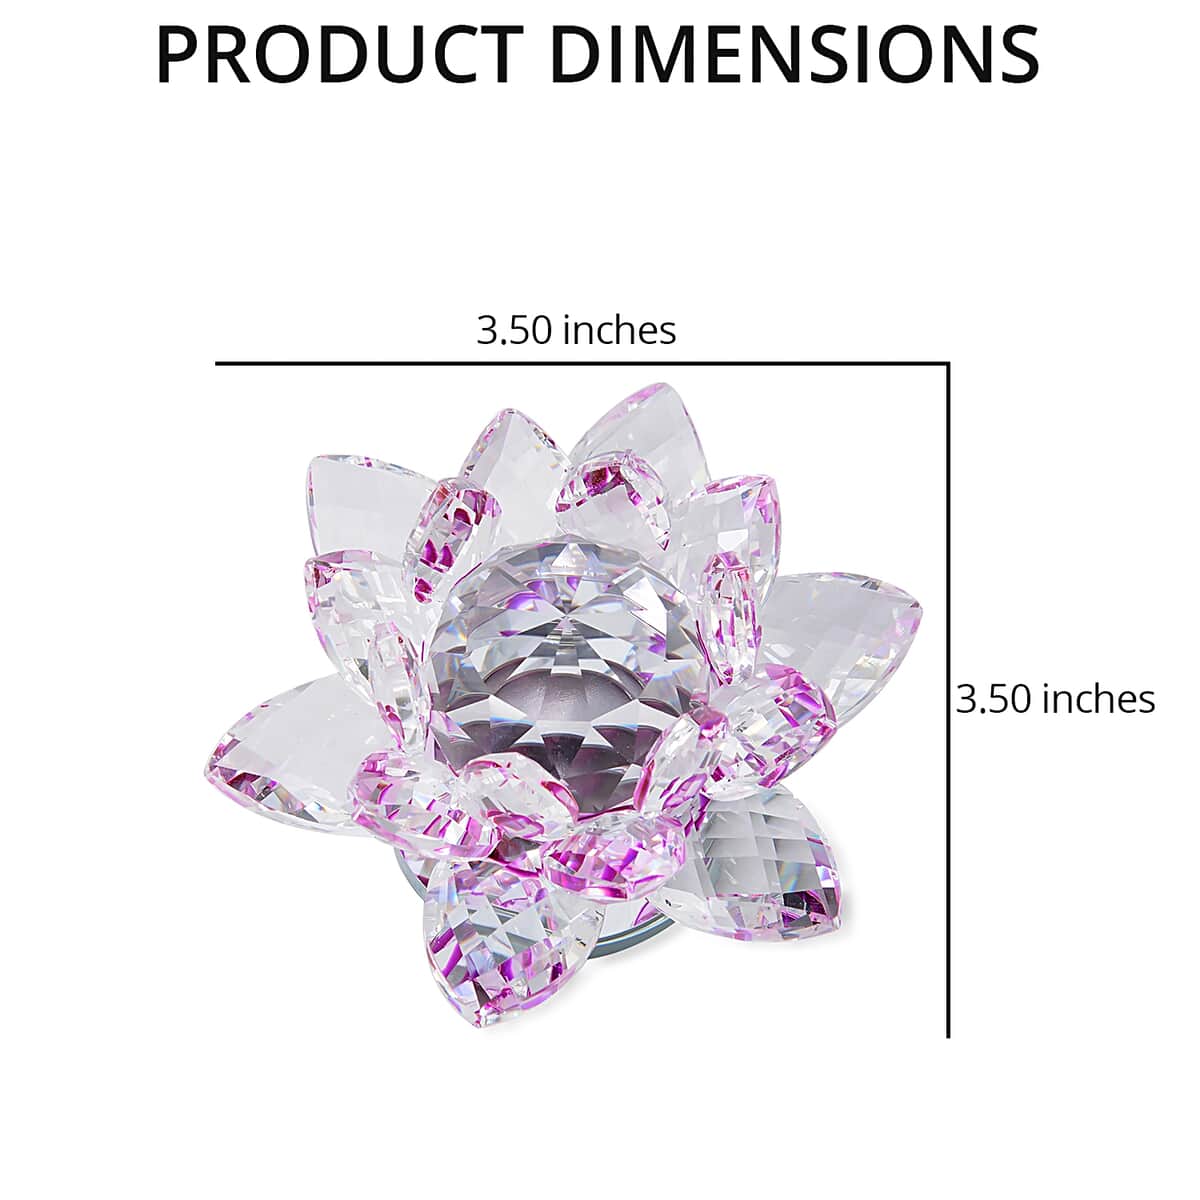 Set of 2 Purple Crystal Lotus Flower with Rotating Base Sculpted Decorations Gifts Box Case for Room Home Kitchen Table Decor, Home Decoration Items Gifts Decorative Showpiece image number 3